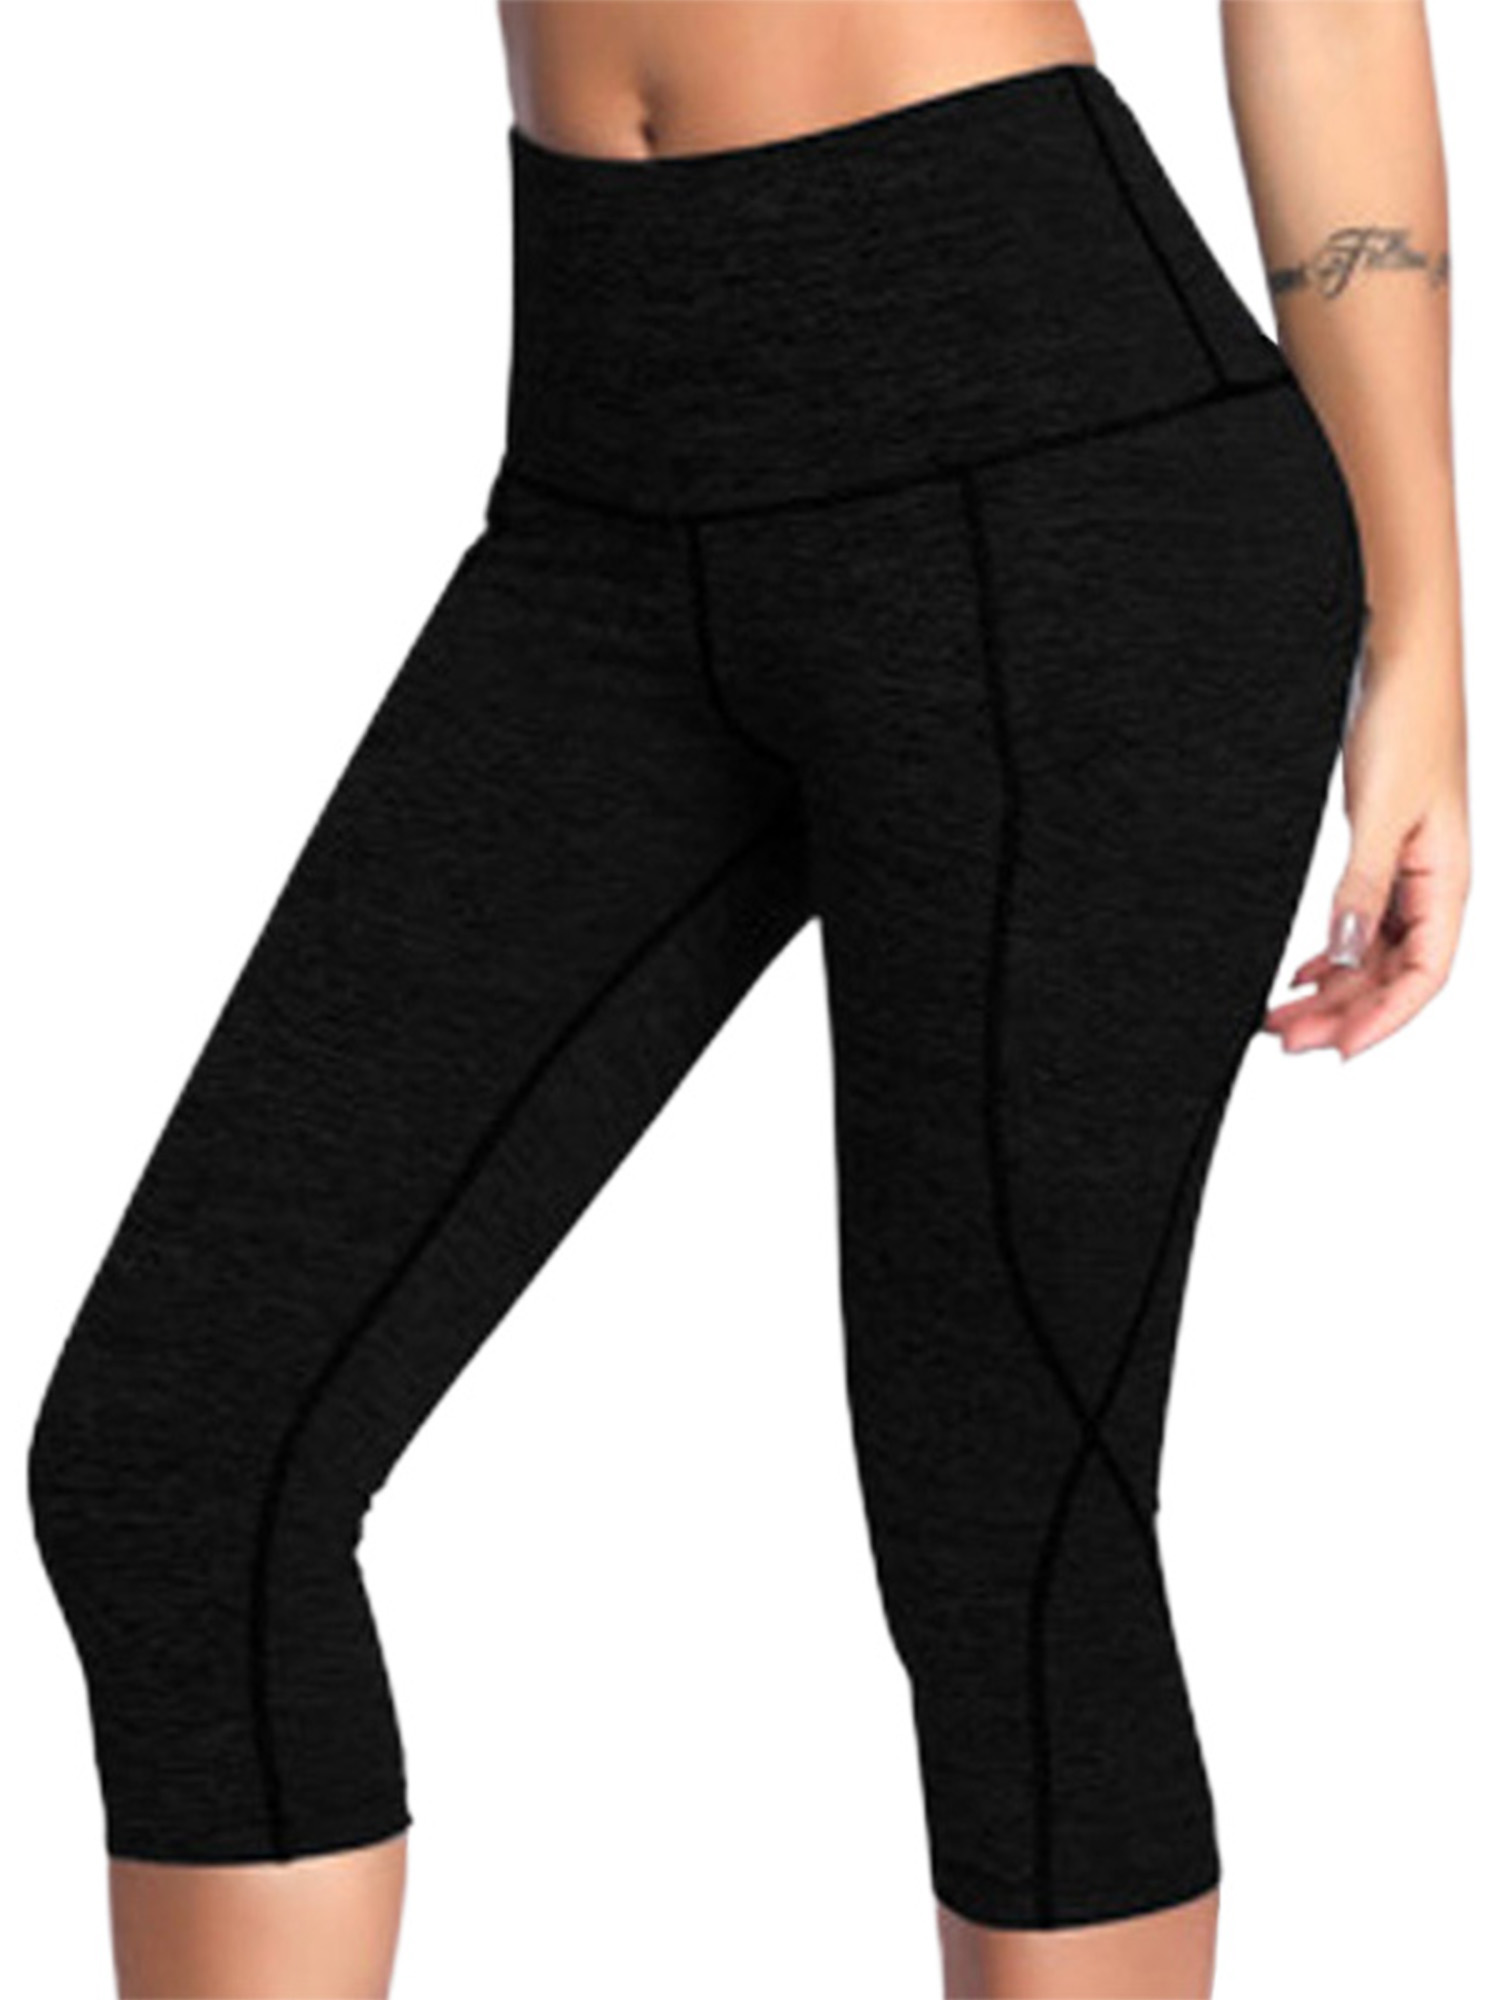 MAWCLOS 2psc Women Capri Leggings Tights Tummy Conytol High Waist Cropped Yoga Pants for Running Fitness with Pocket - image 5 of 8